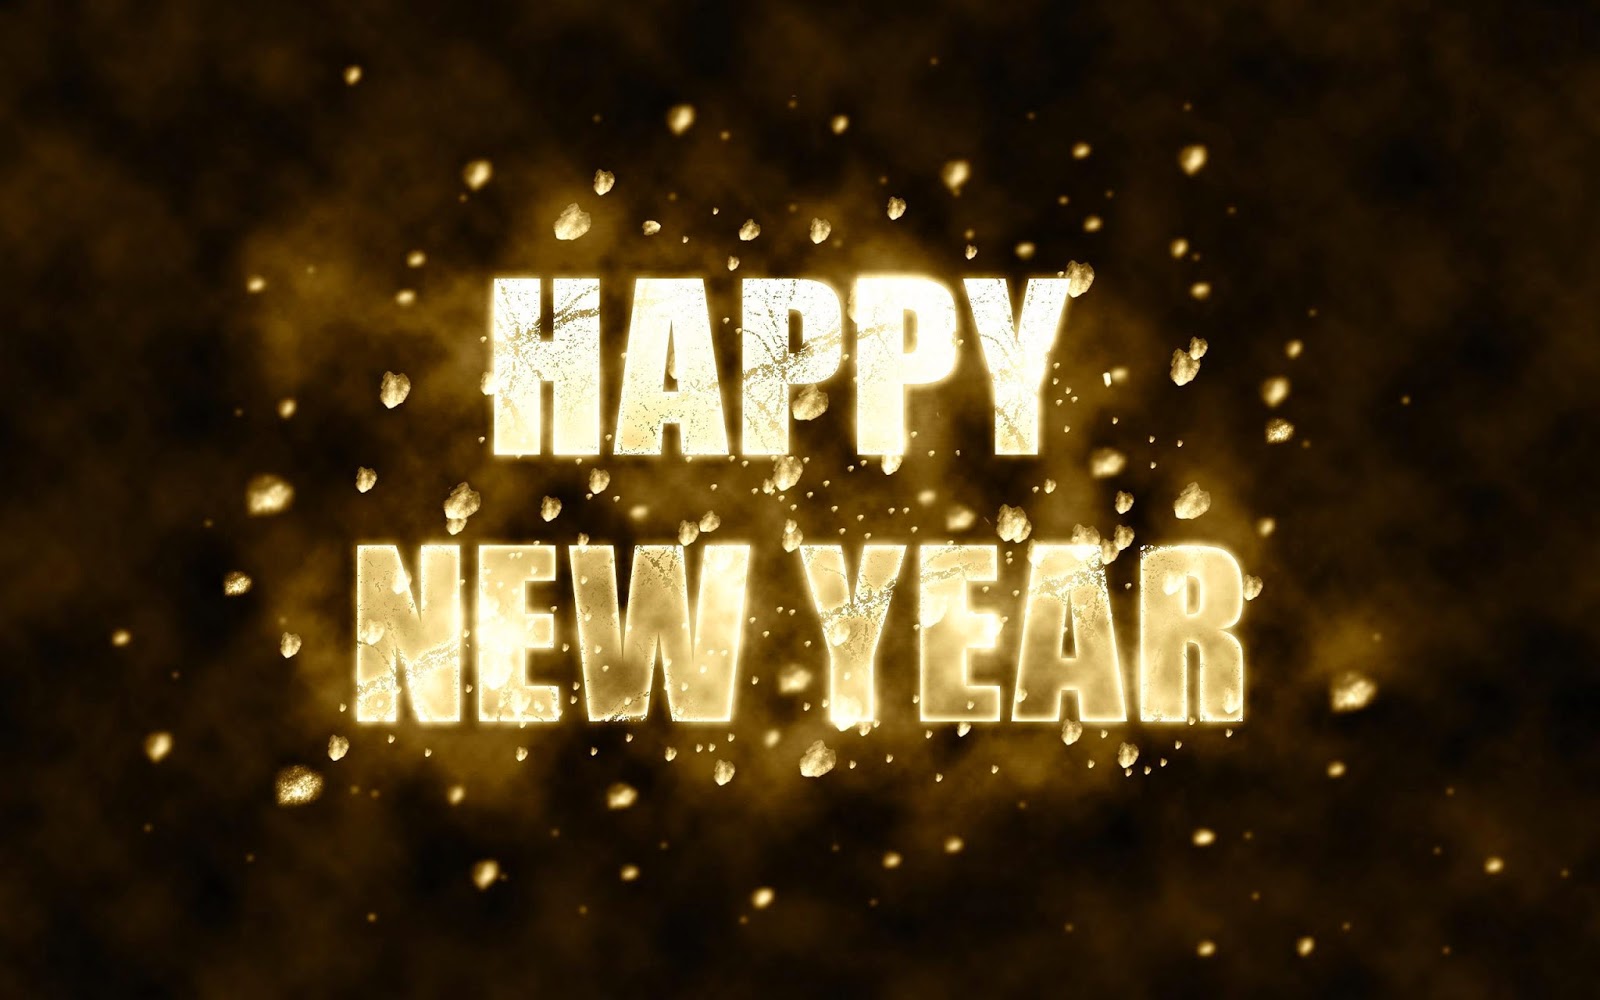 desktop nice happy new year images free download